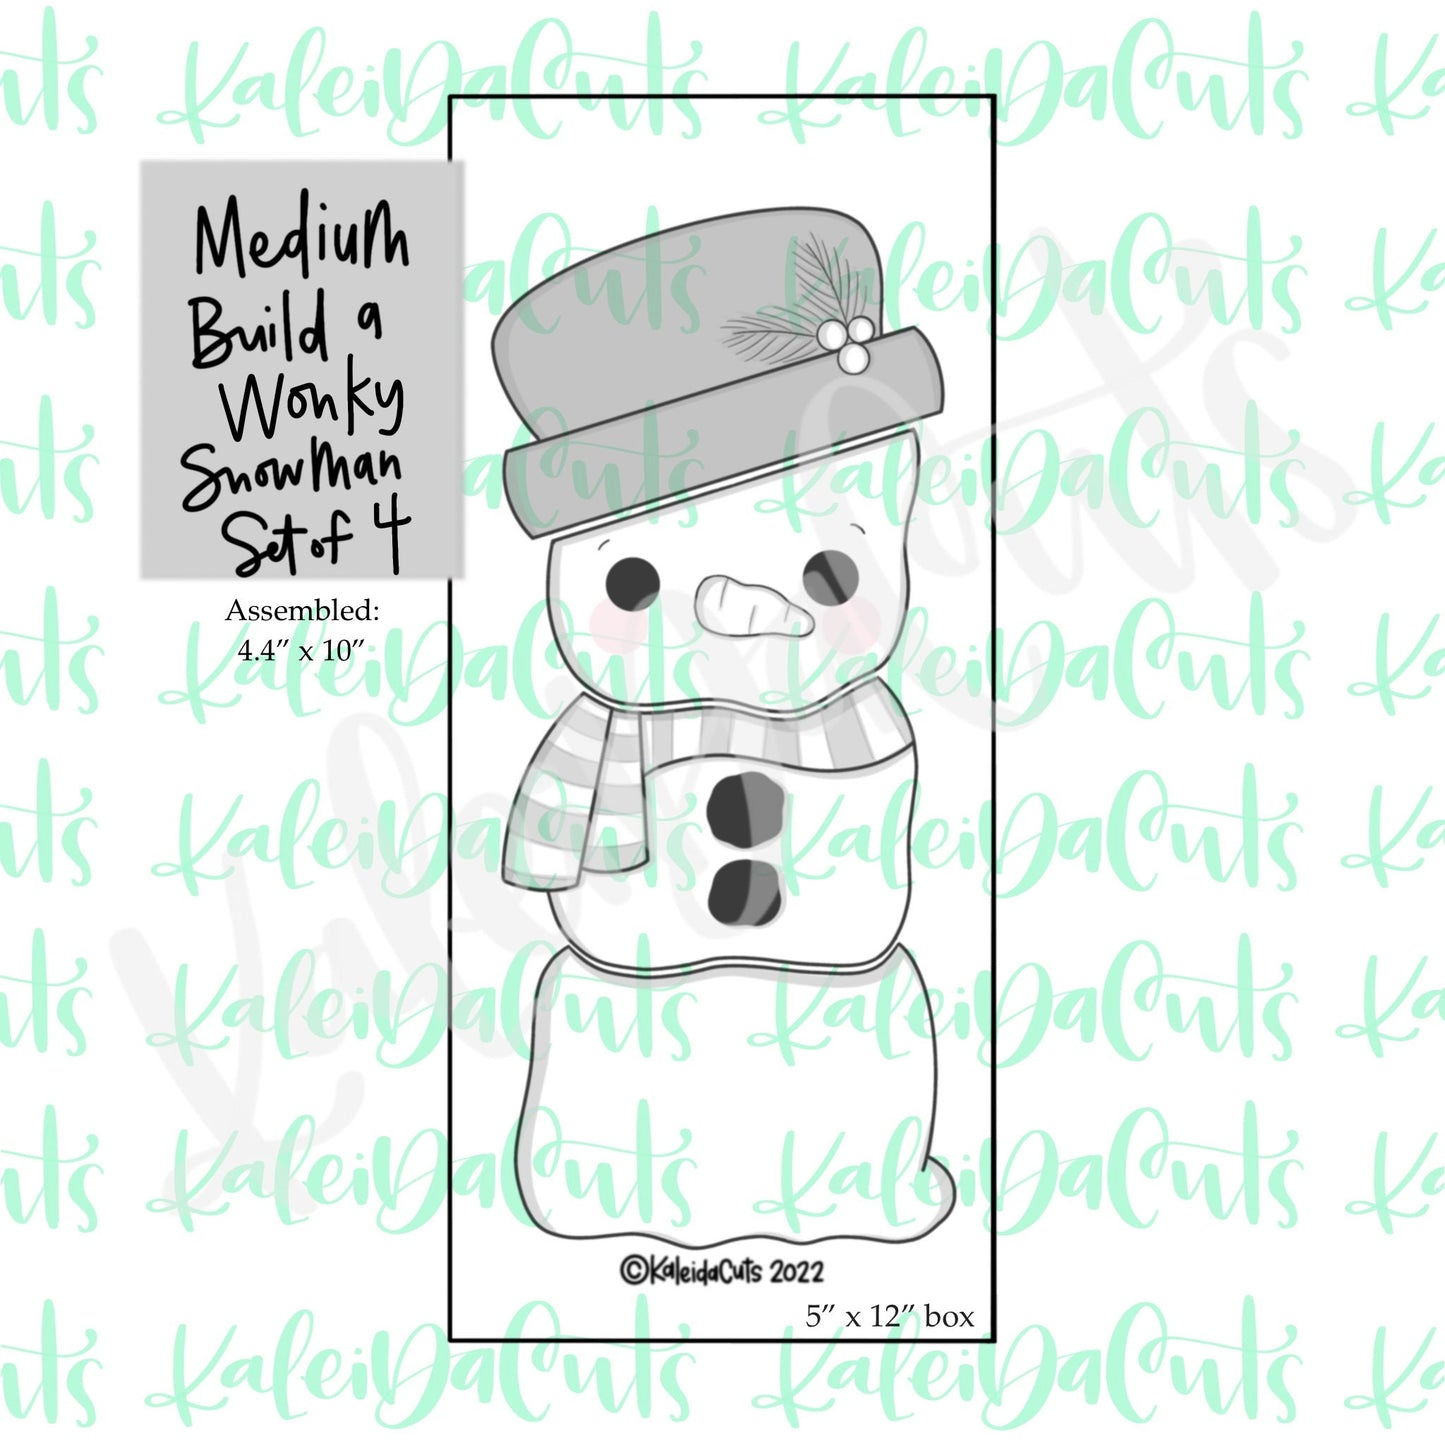 Medium Build a Wonky Snowman Set of 4 Cookie Cutters